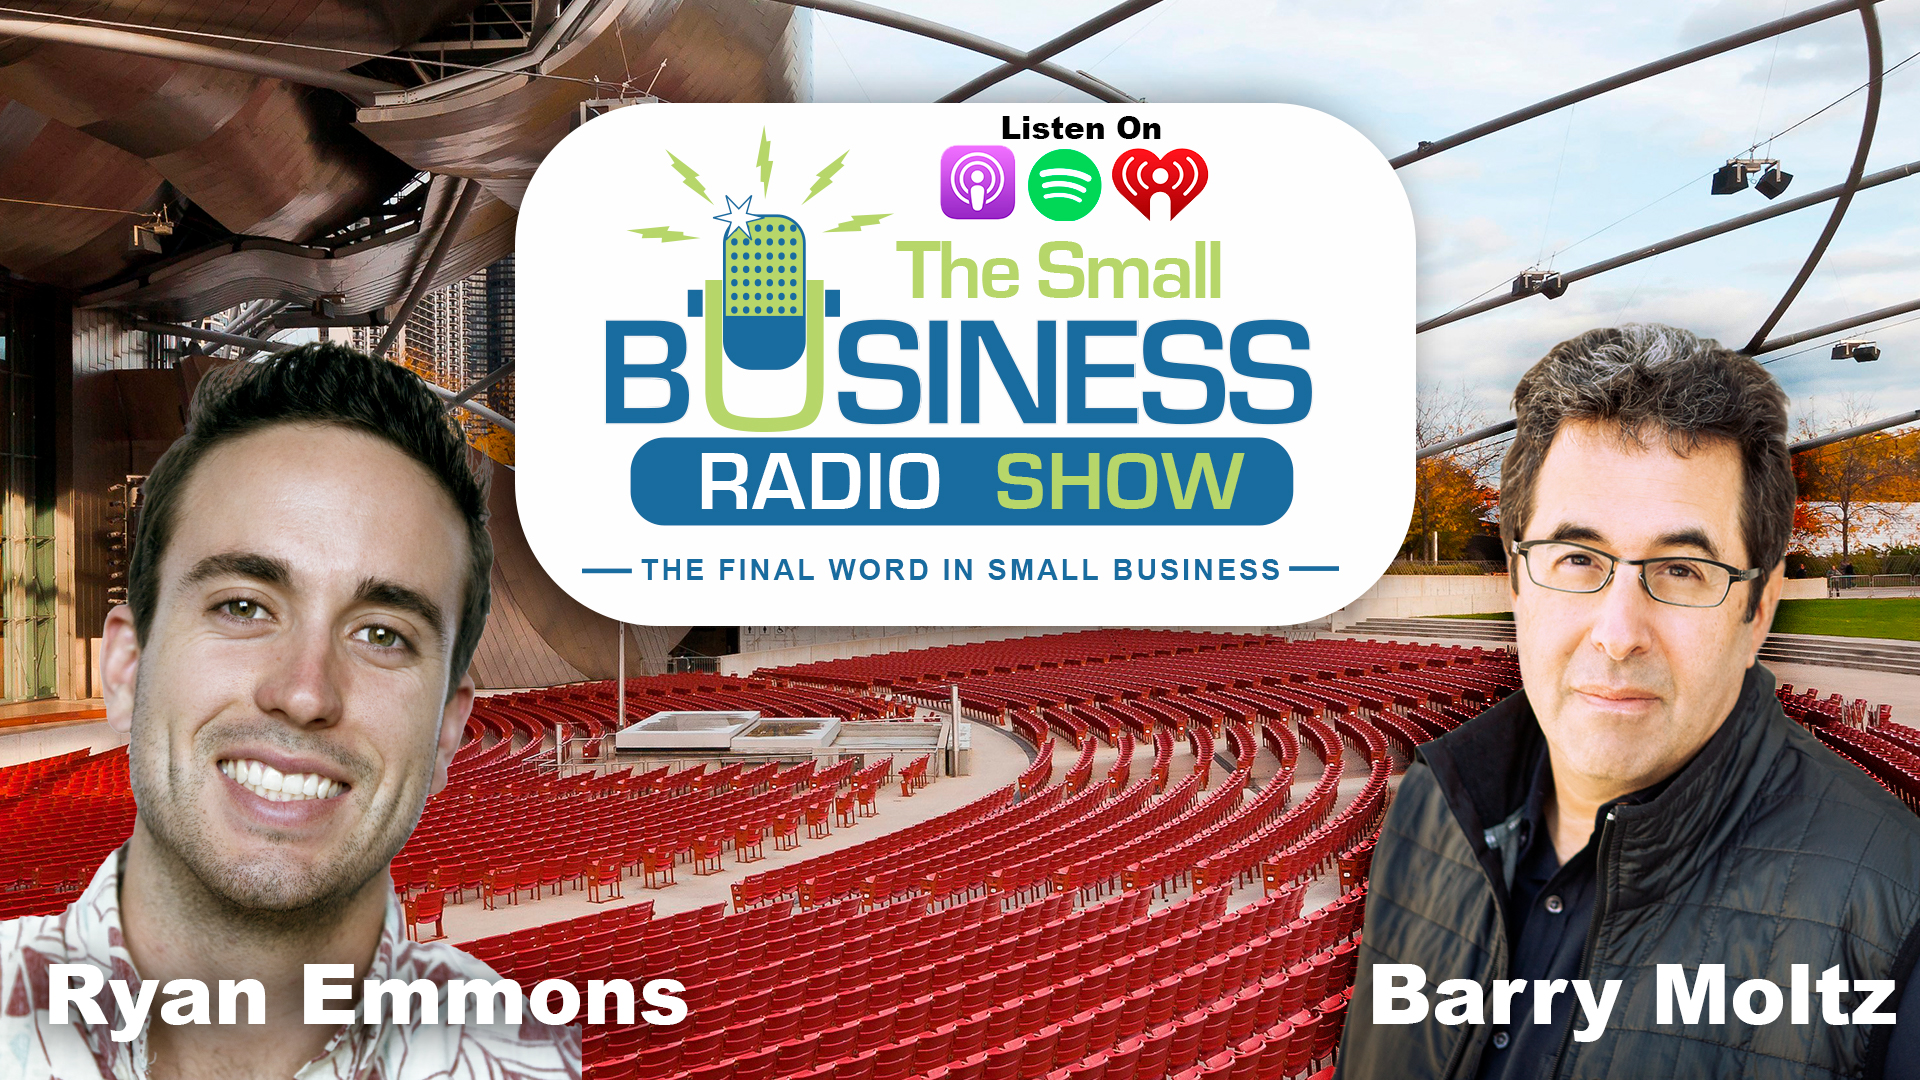 Ryan Emmons on The Small Business Radio Show